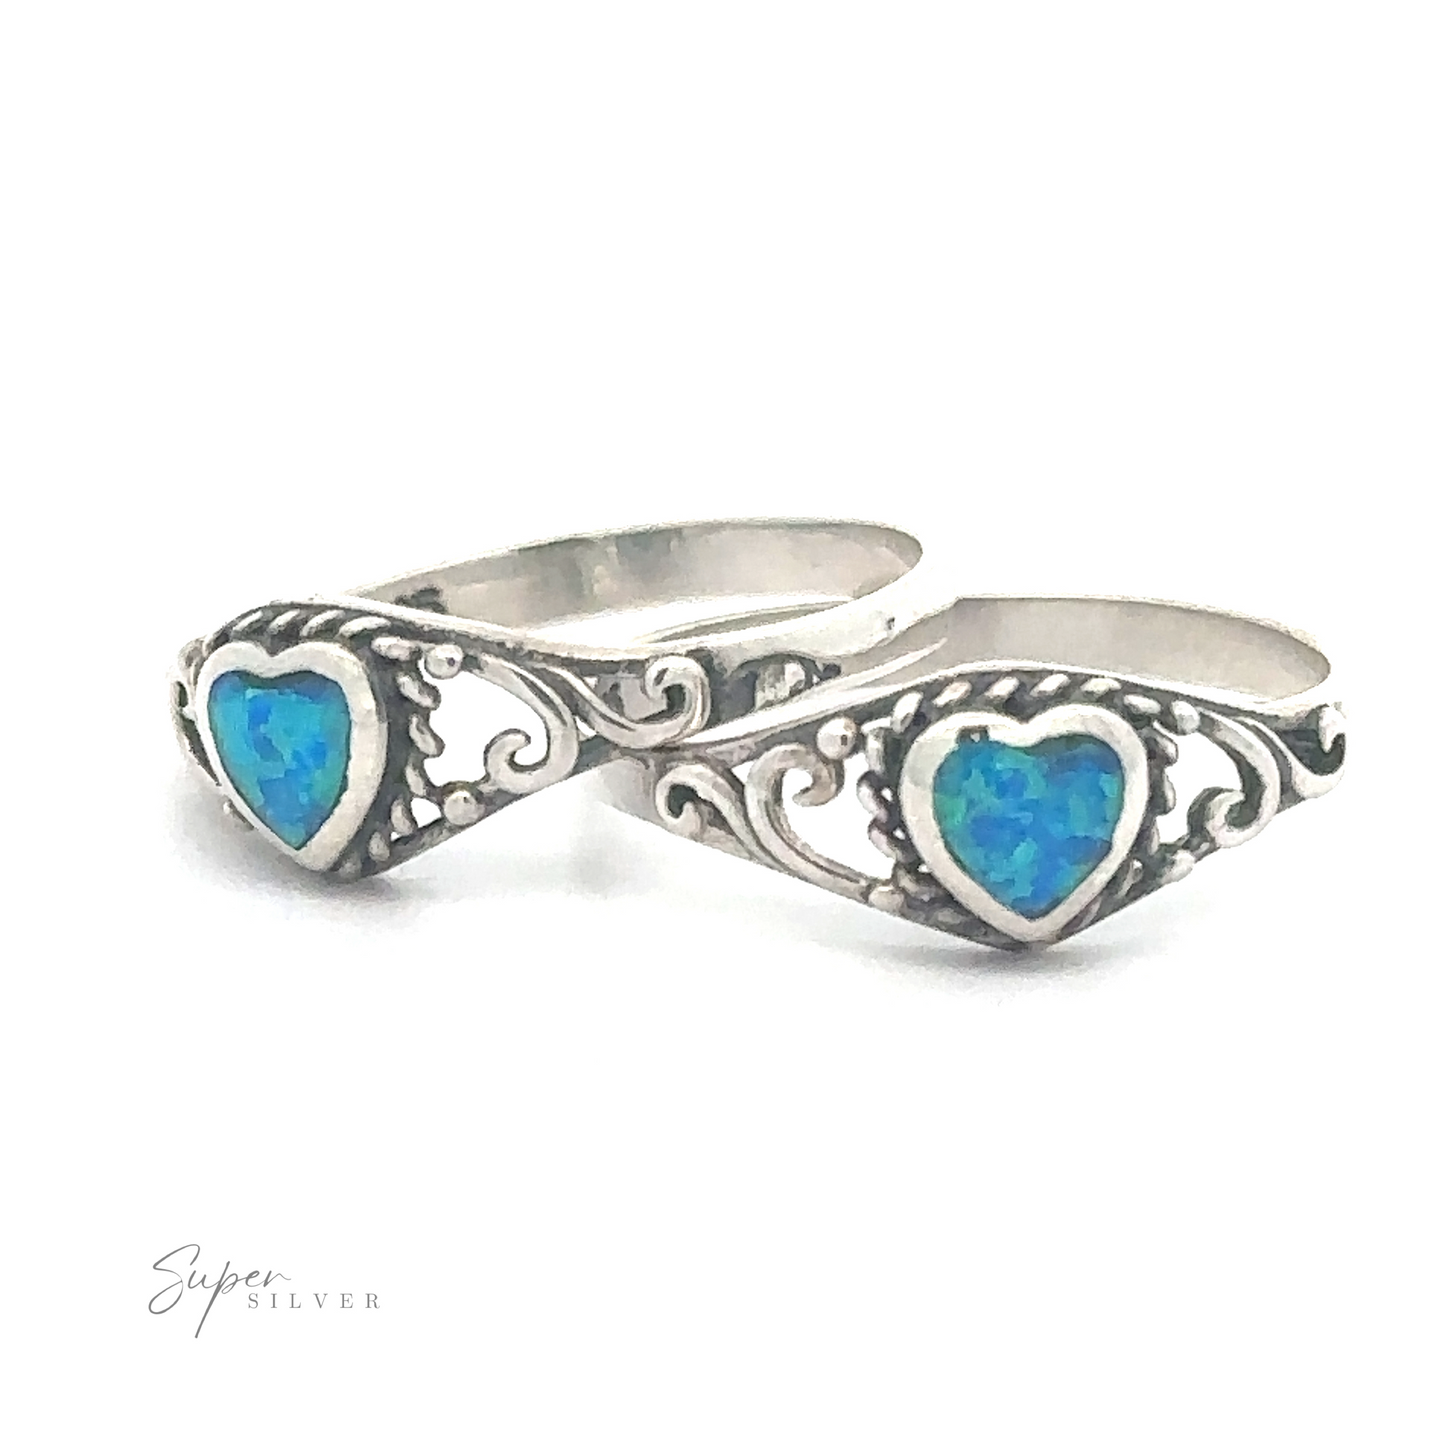 A pair of Dainty Blue Opal Heart Rings with filigree designs.